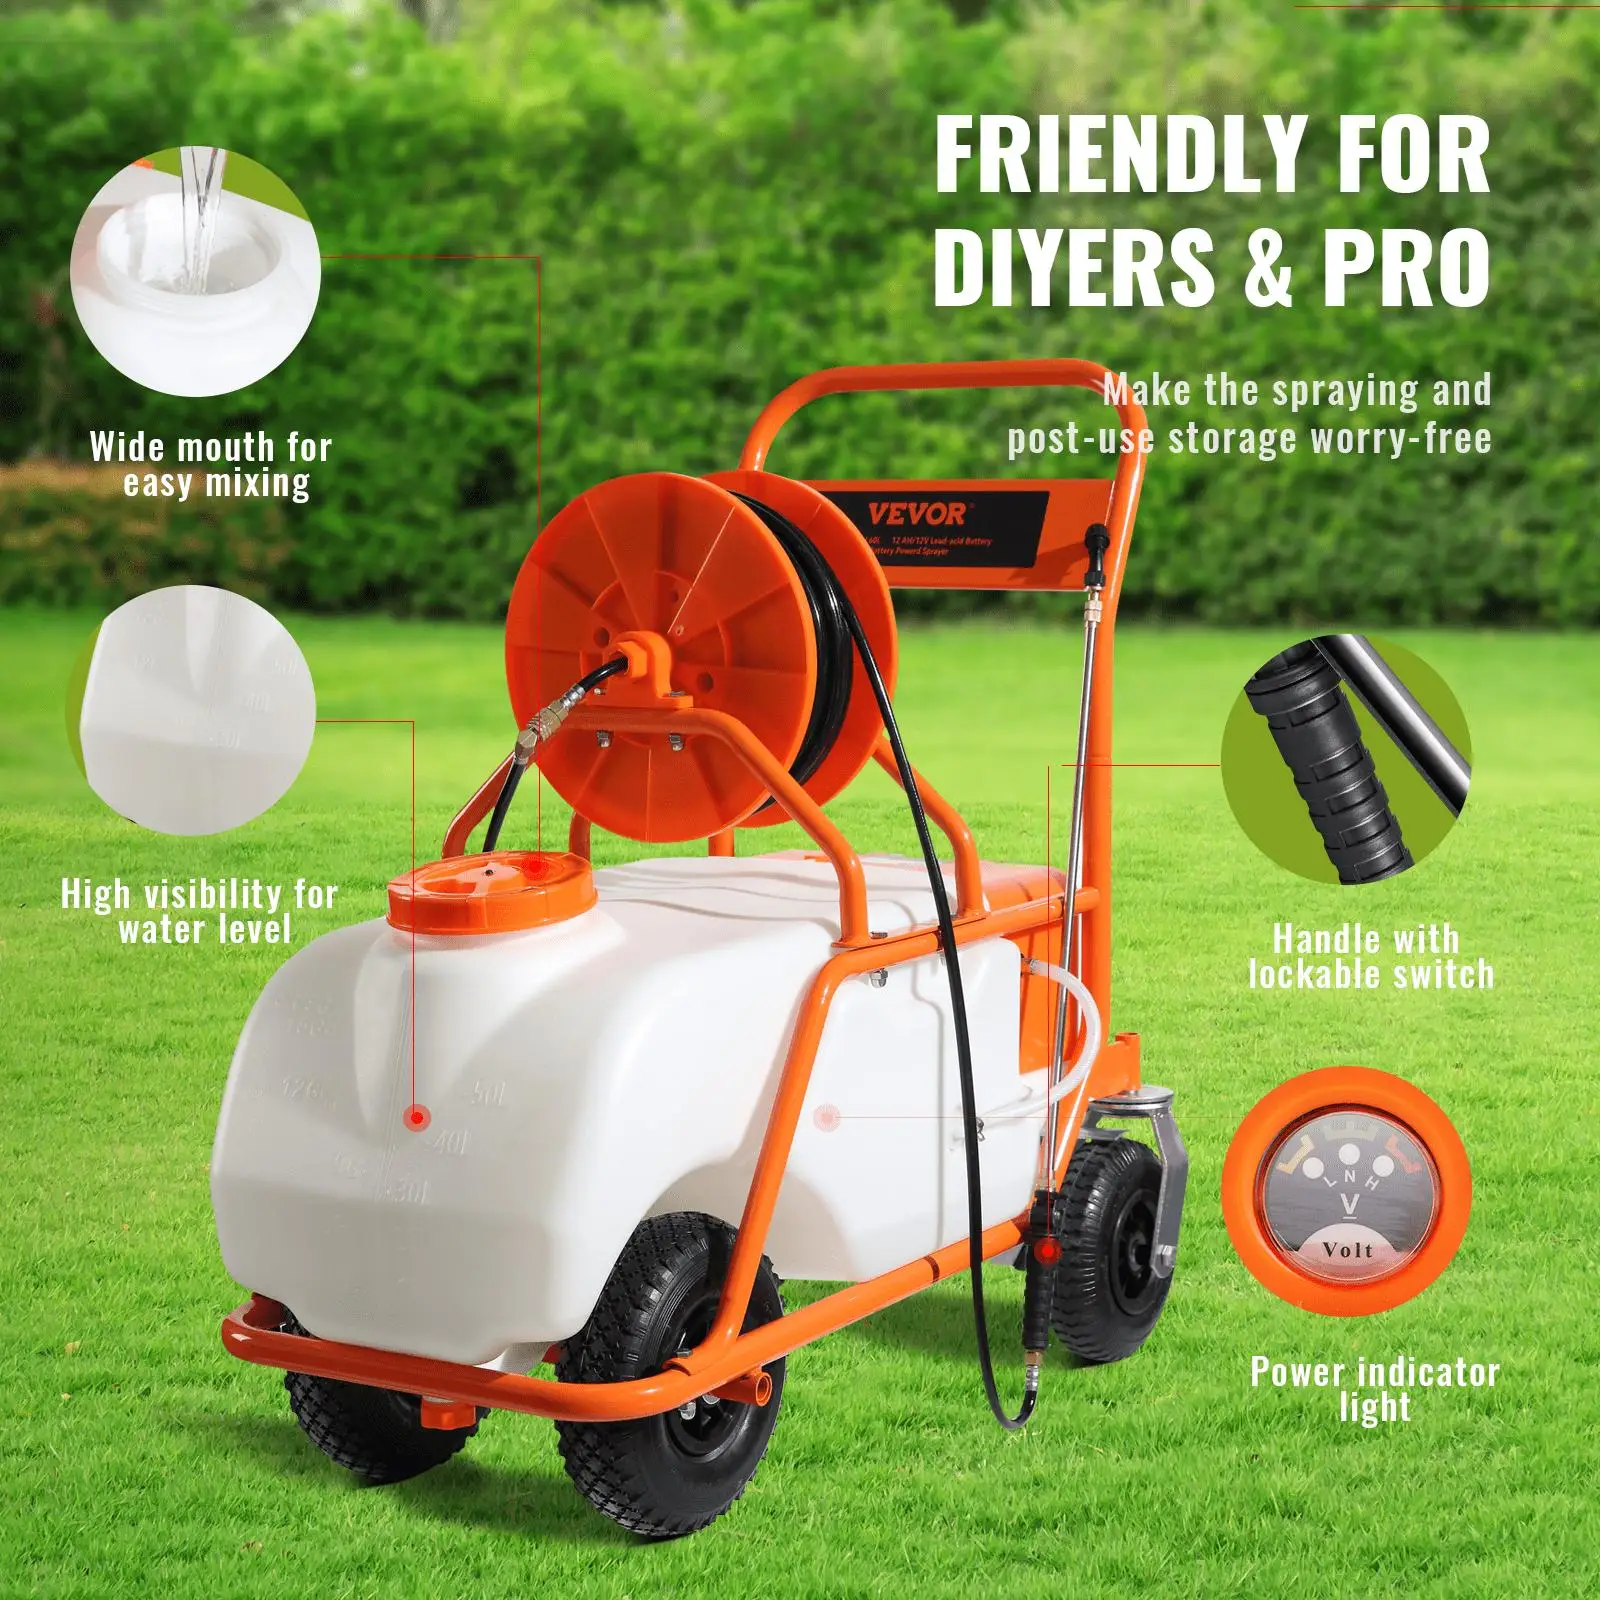 Durability and construction of VEVOR Battery Powered Lawn Sprayer